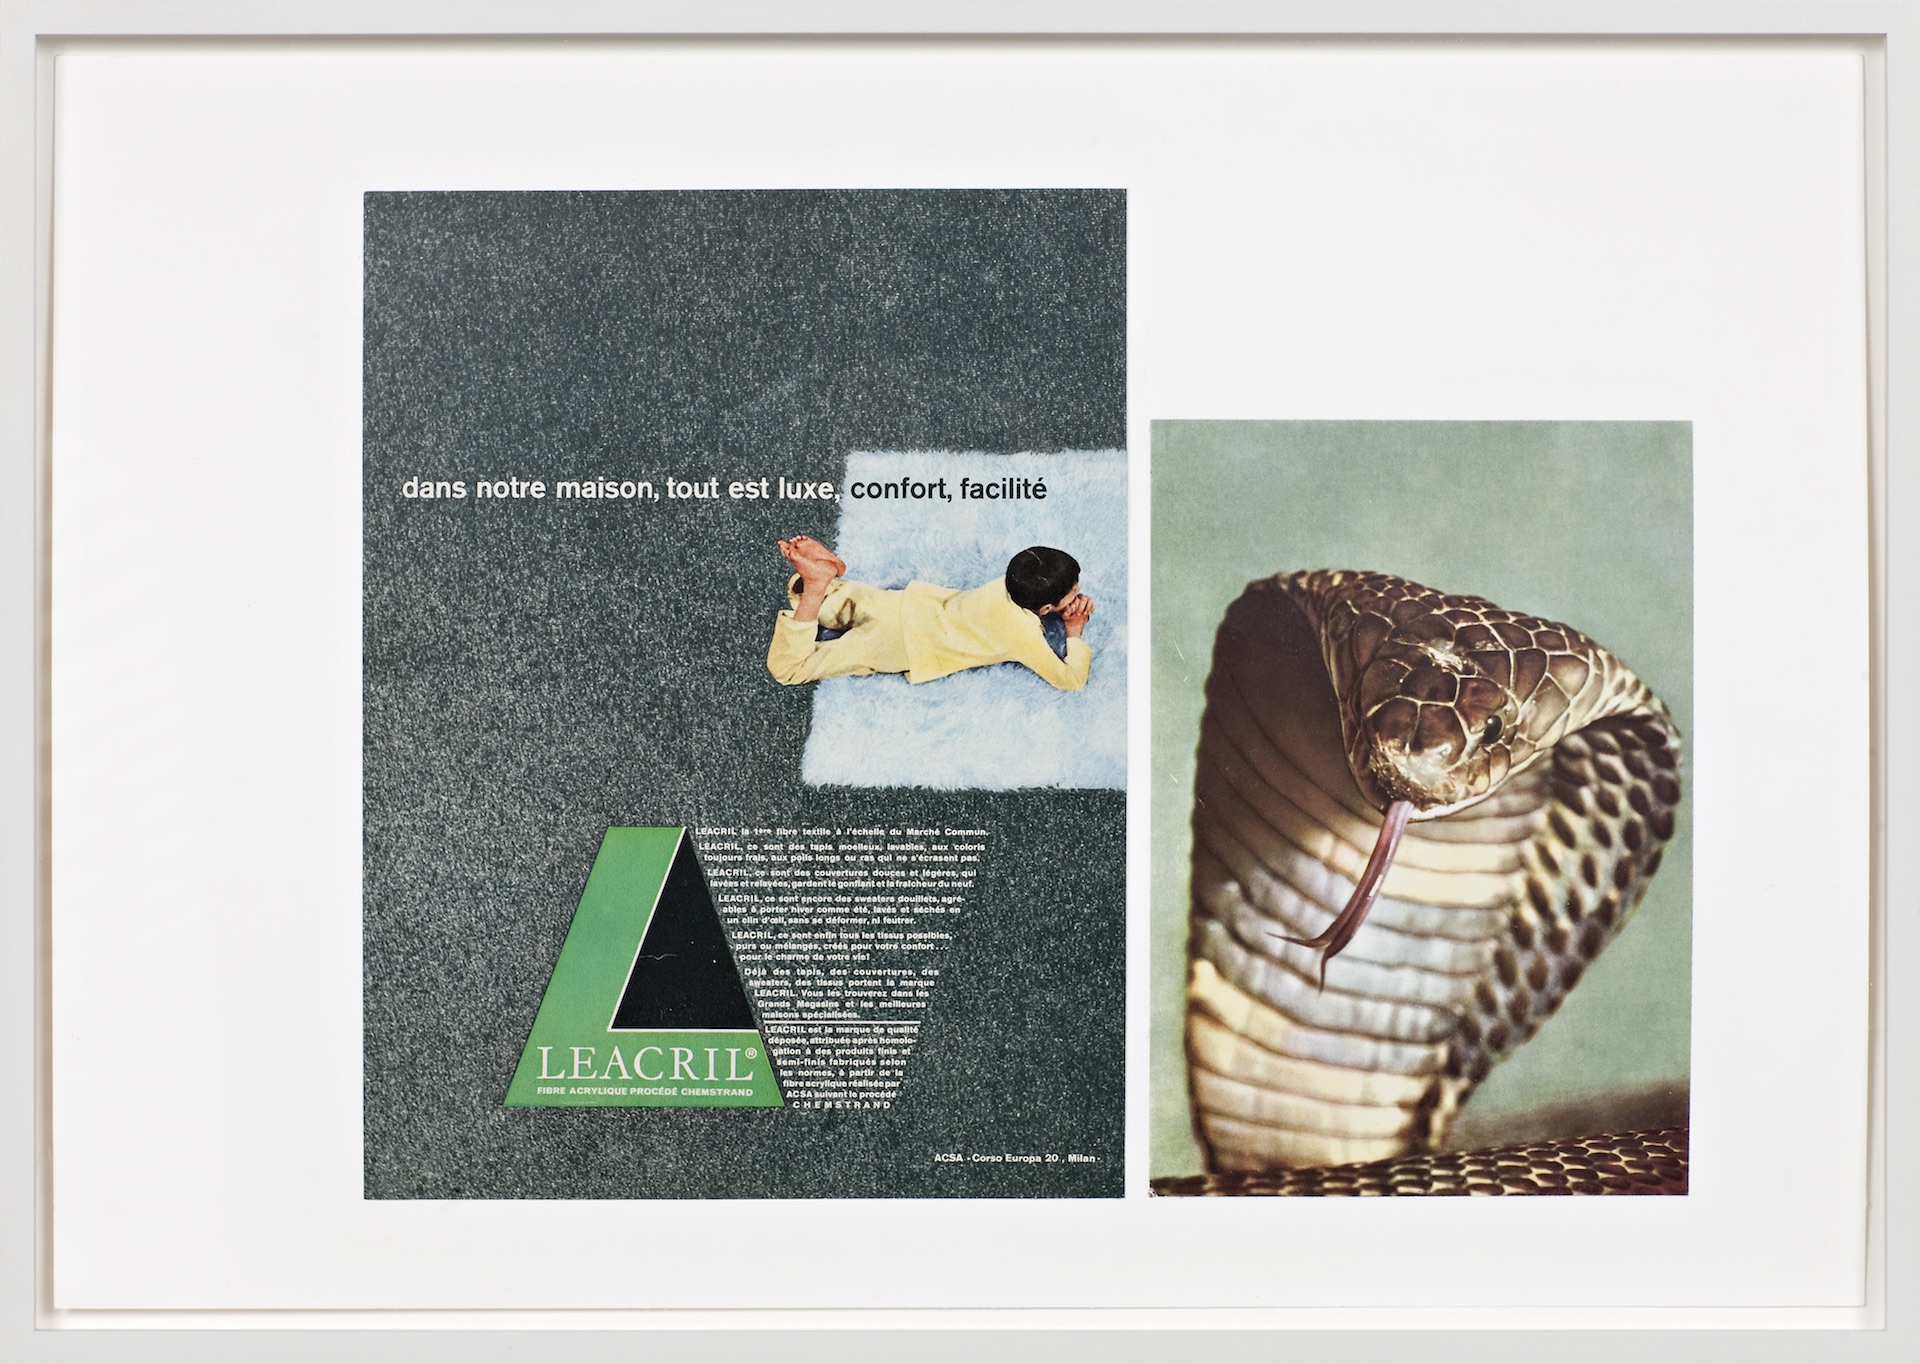   Baby Snakes Hatching. Ruins. Ruins. (dans notre maison)  2011  Collage, 35,5 x 51cm 